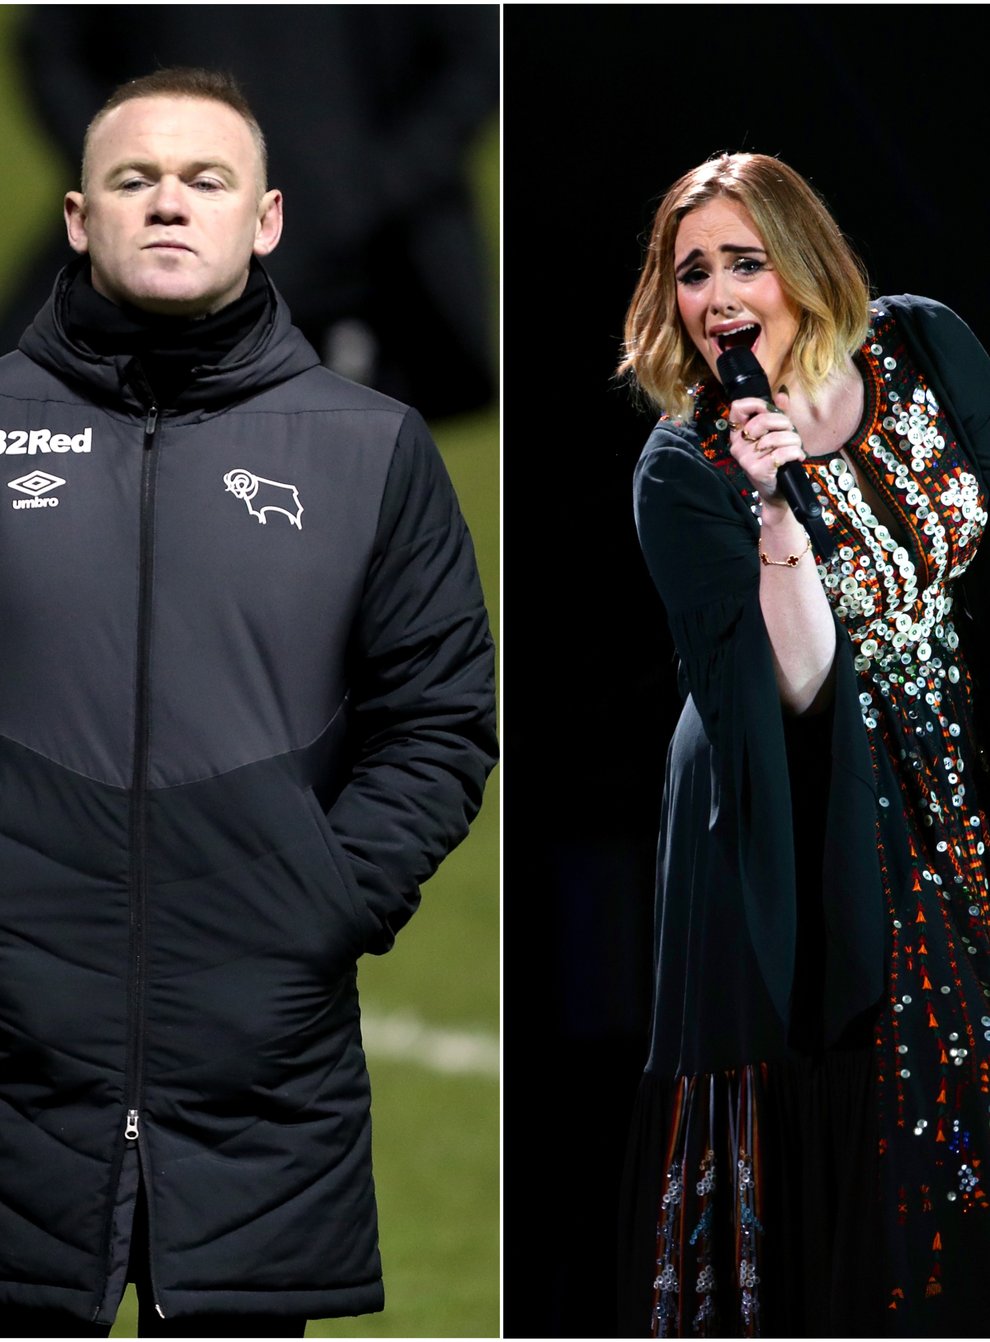 Wayne Rooney will have been unimpressed with his side's defeat to the Adele-supporting Chorley.